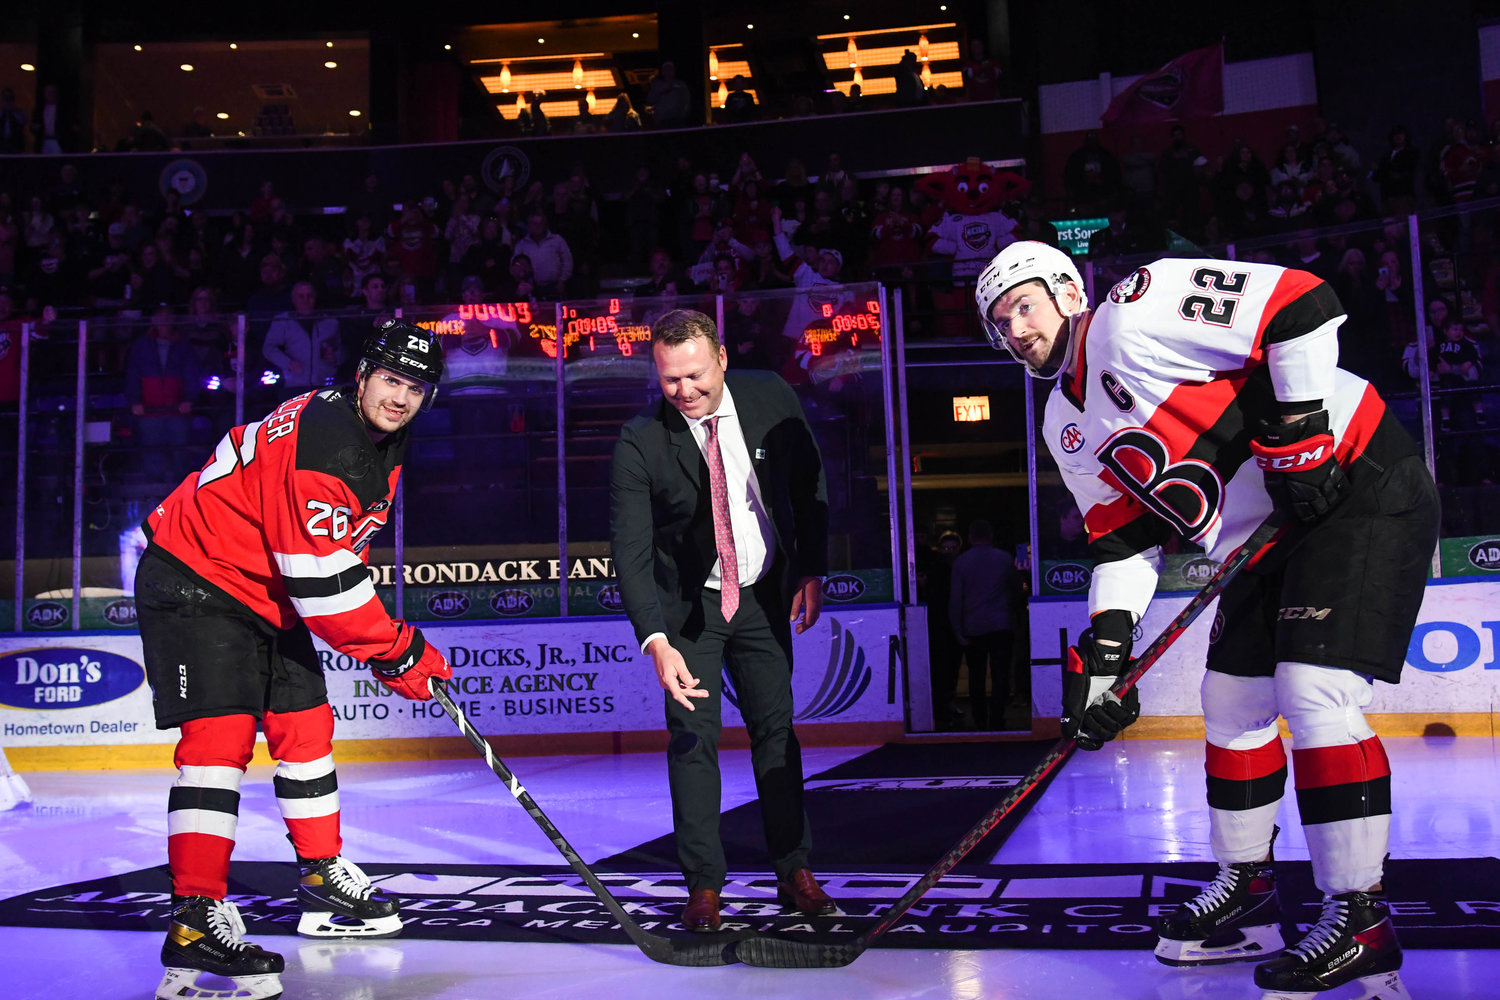 DROP THE PUCK — Hall of Fame goaltender Martin Brodeur drops the puck to start the AHL game between the Utica Comets and the Belleville Senators on Wednesday night in Utica.